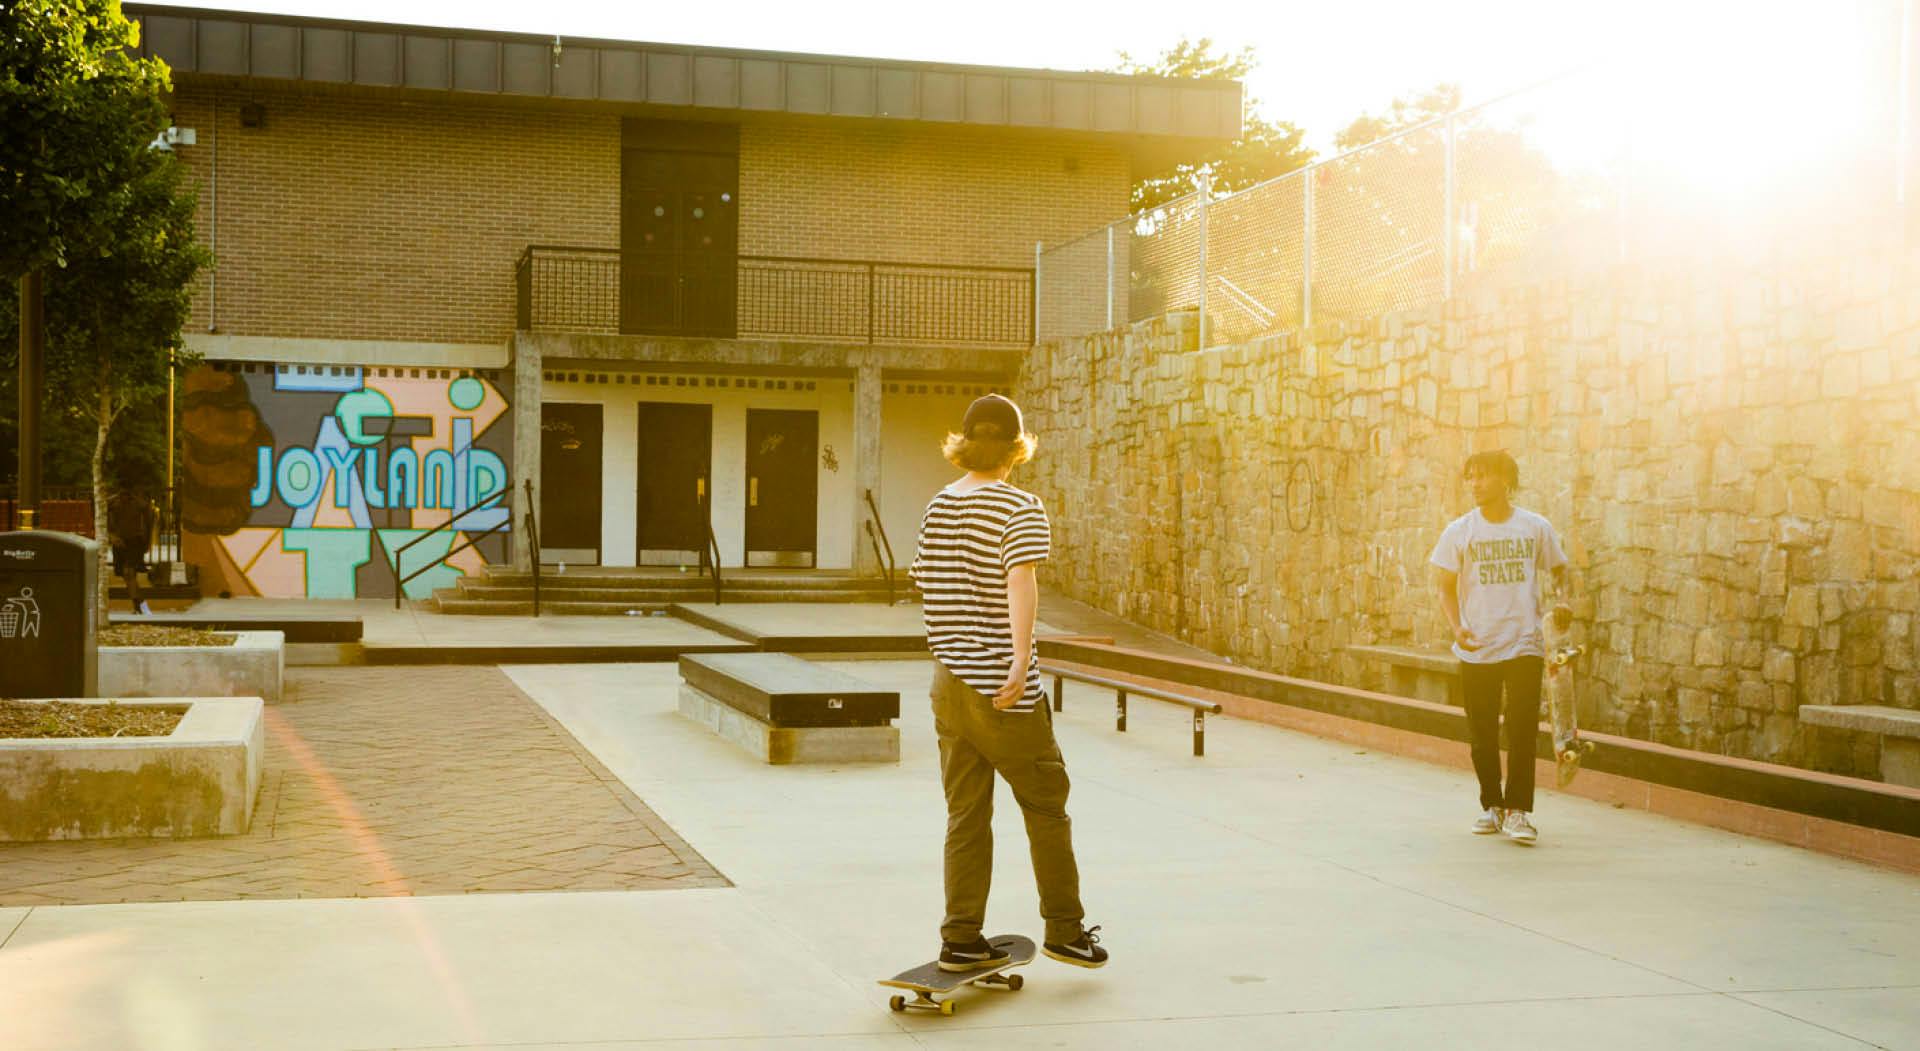 Two young men skateboard in a designated space behind a rec center.